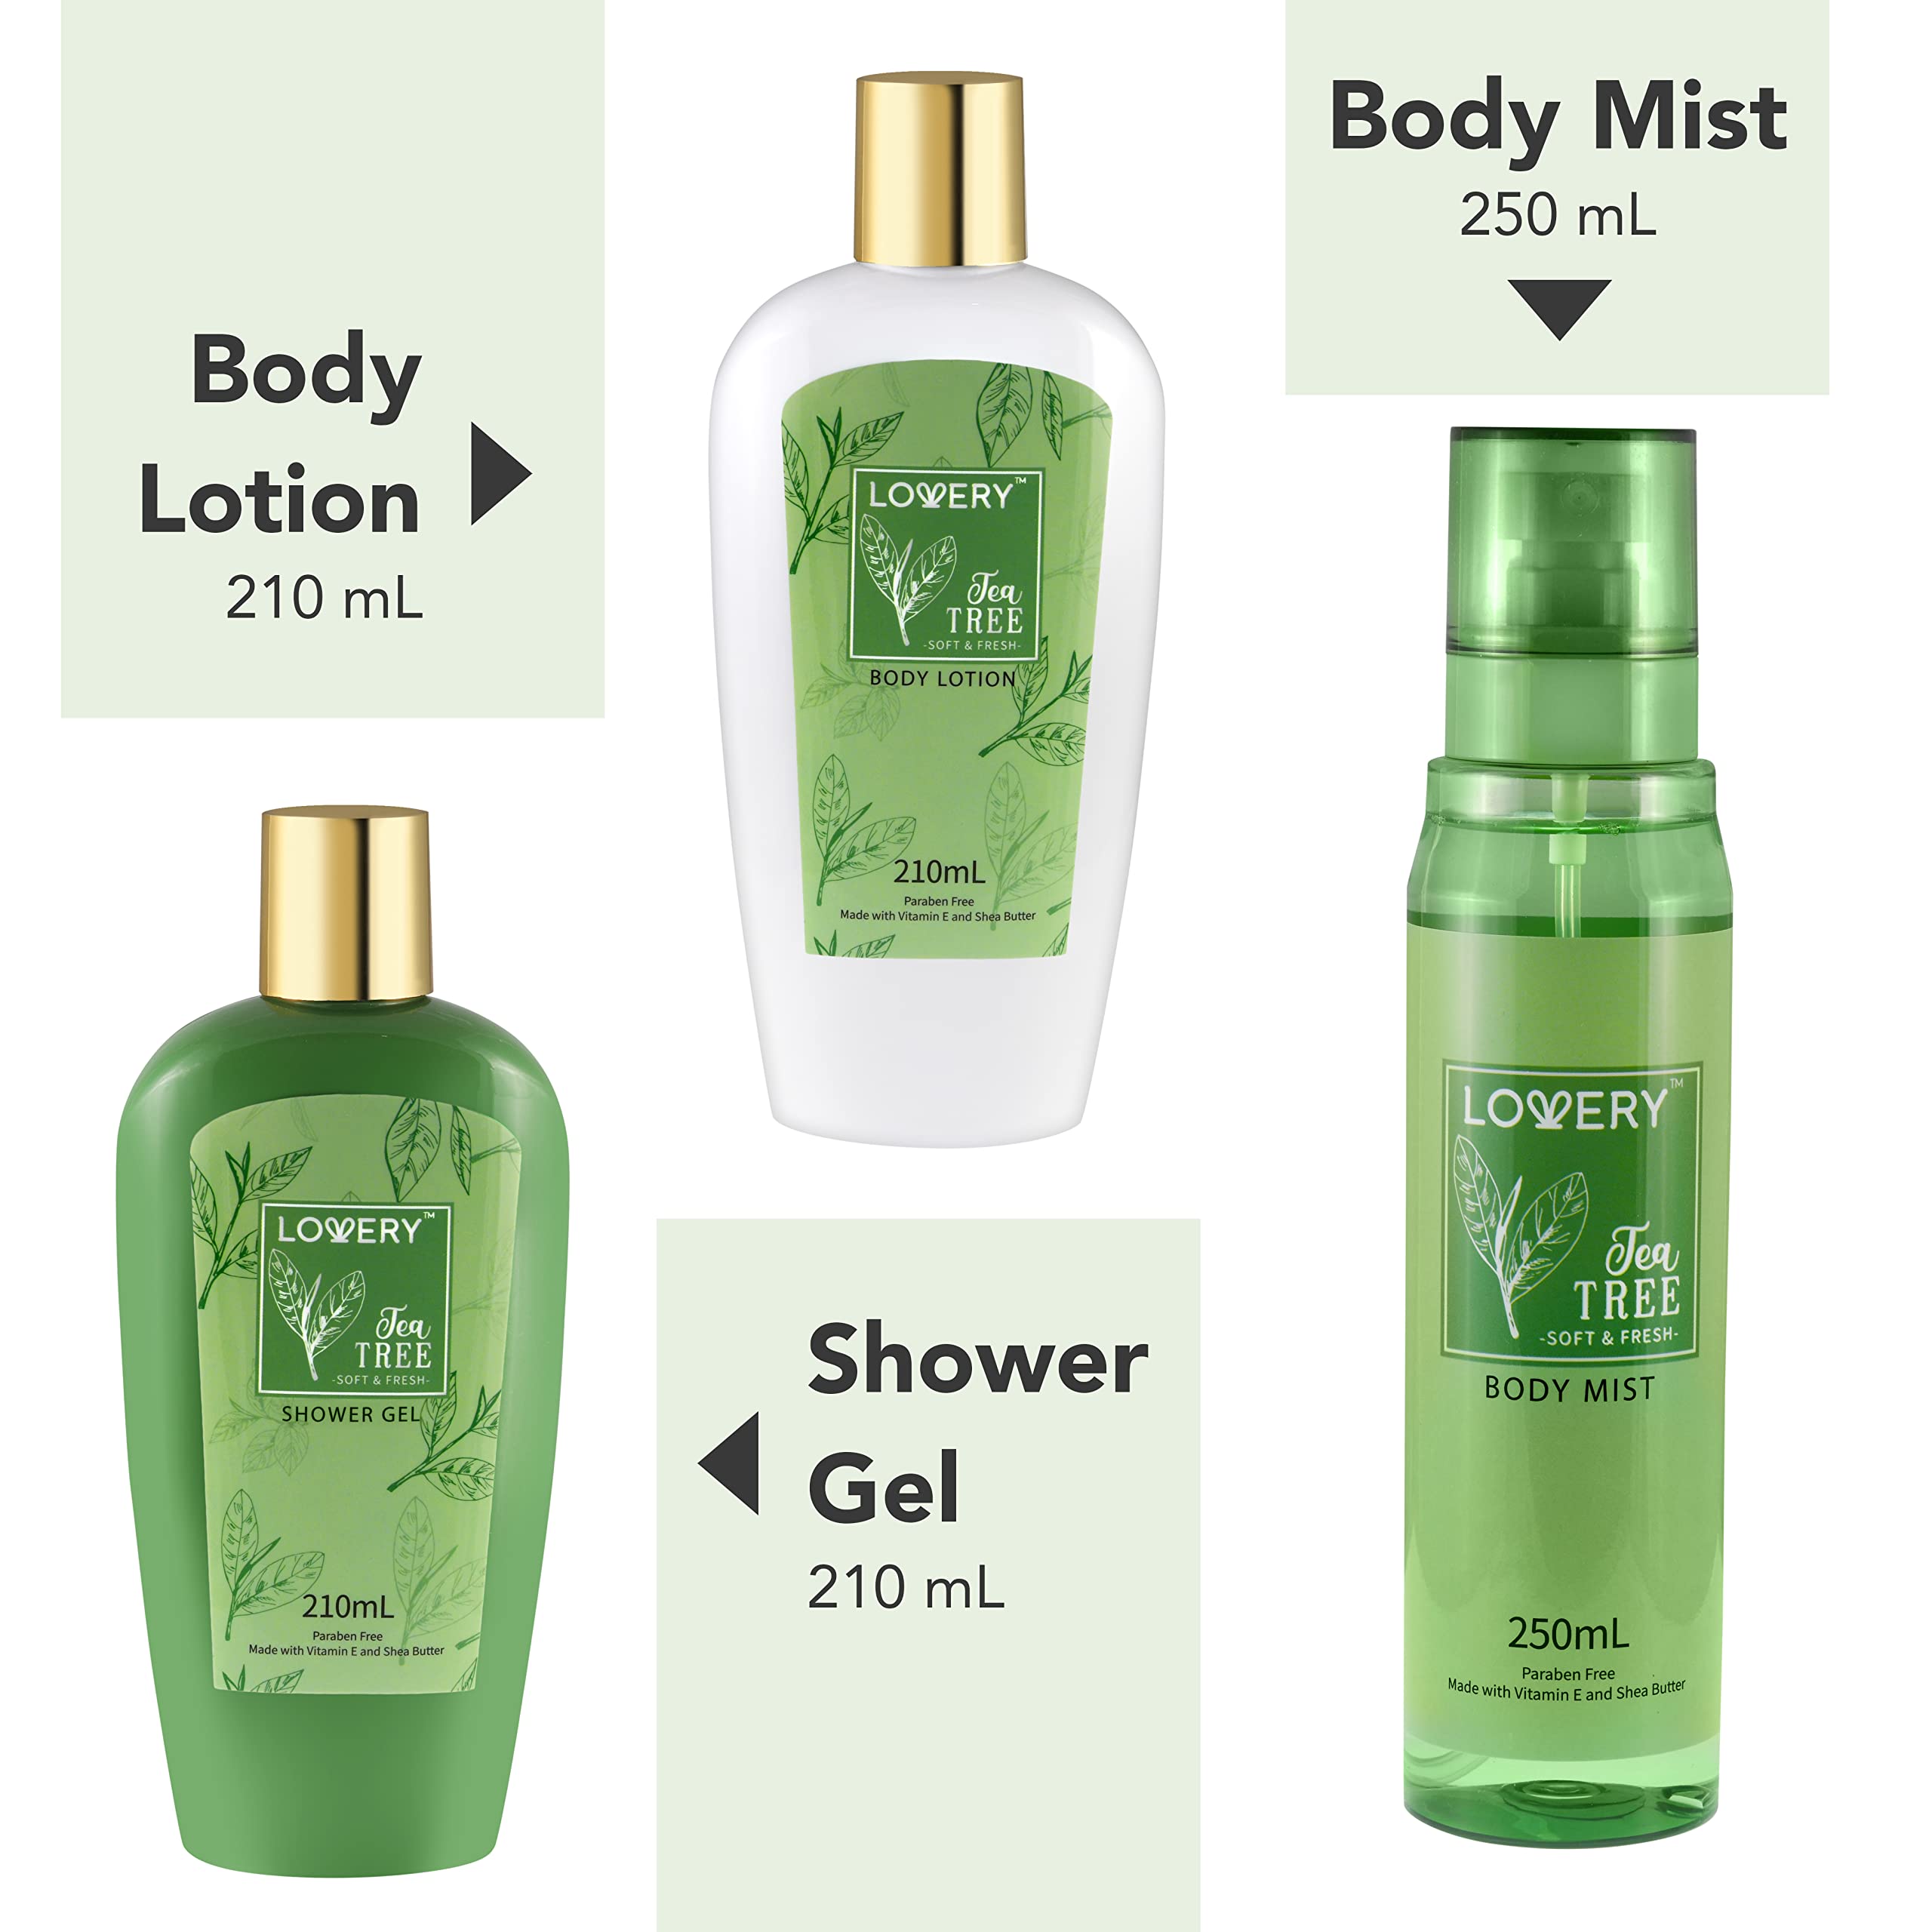 Bath and Body Gift Set for Women & Men, Tea Tree Home Spa Set Enriched With Natural Extracts, Vitamin E, Shea Butter - Shower Gel, Body Lotion, Body Mist, Personal Self Care Kit & Body Care Travel Set